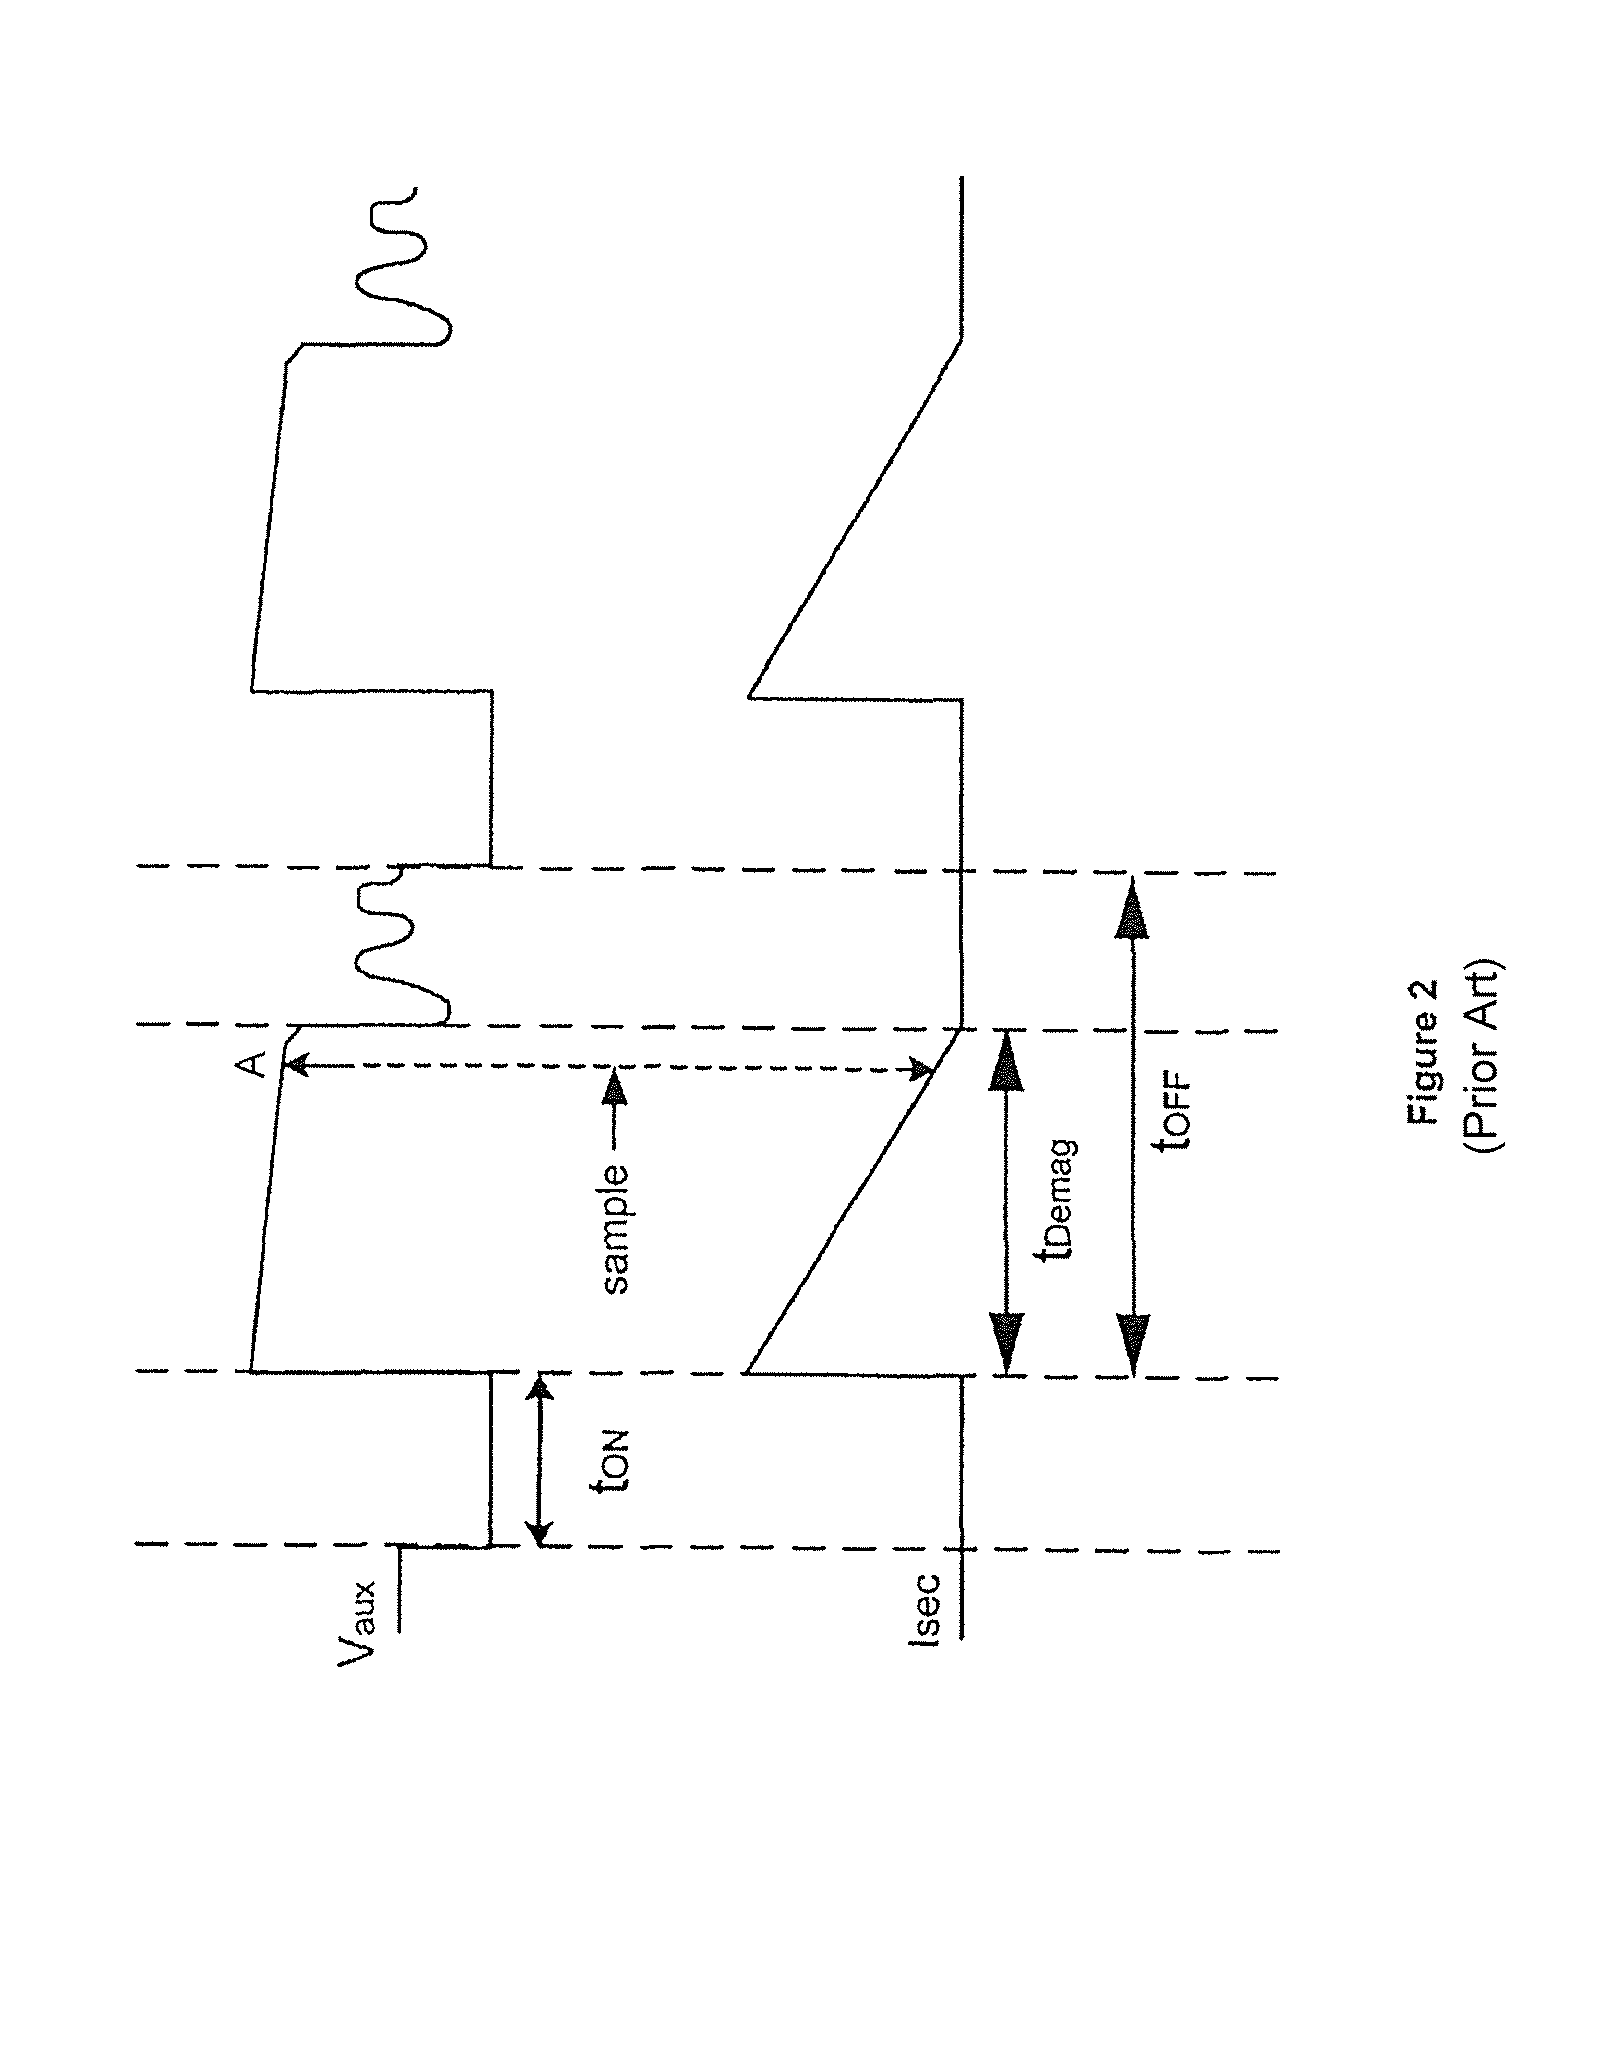 Systems and methods for flyback power converters with switching frequency and peak current adjustments based on changes in feedback signals